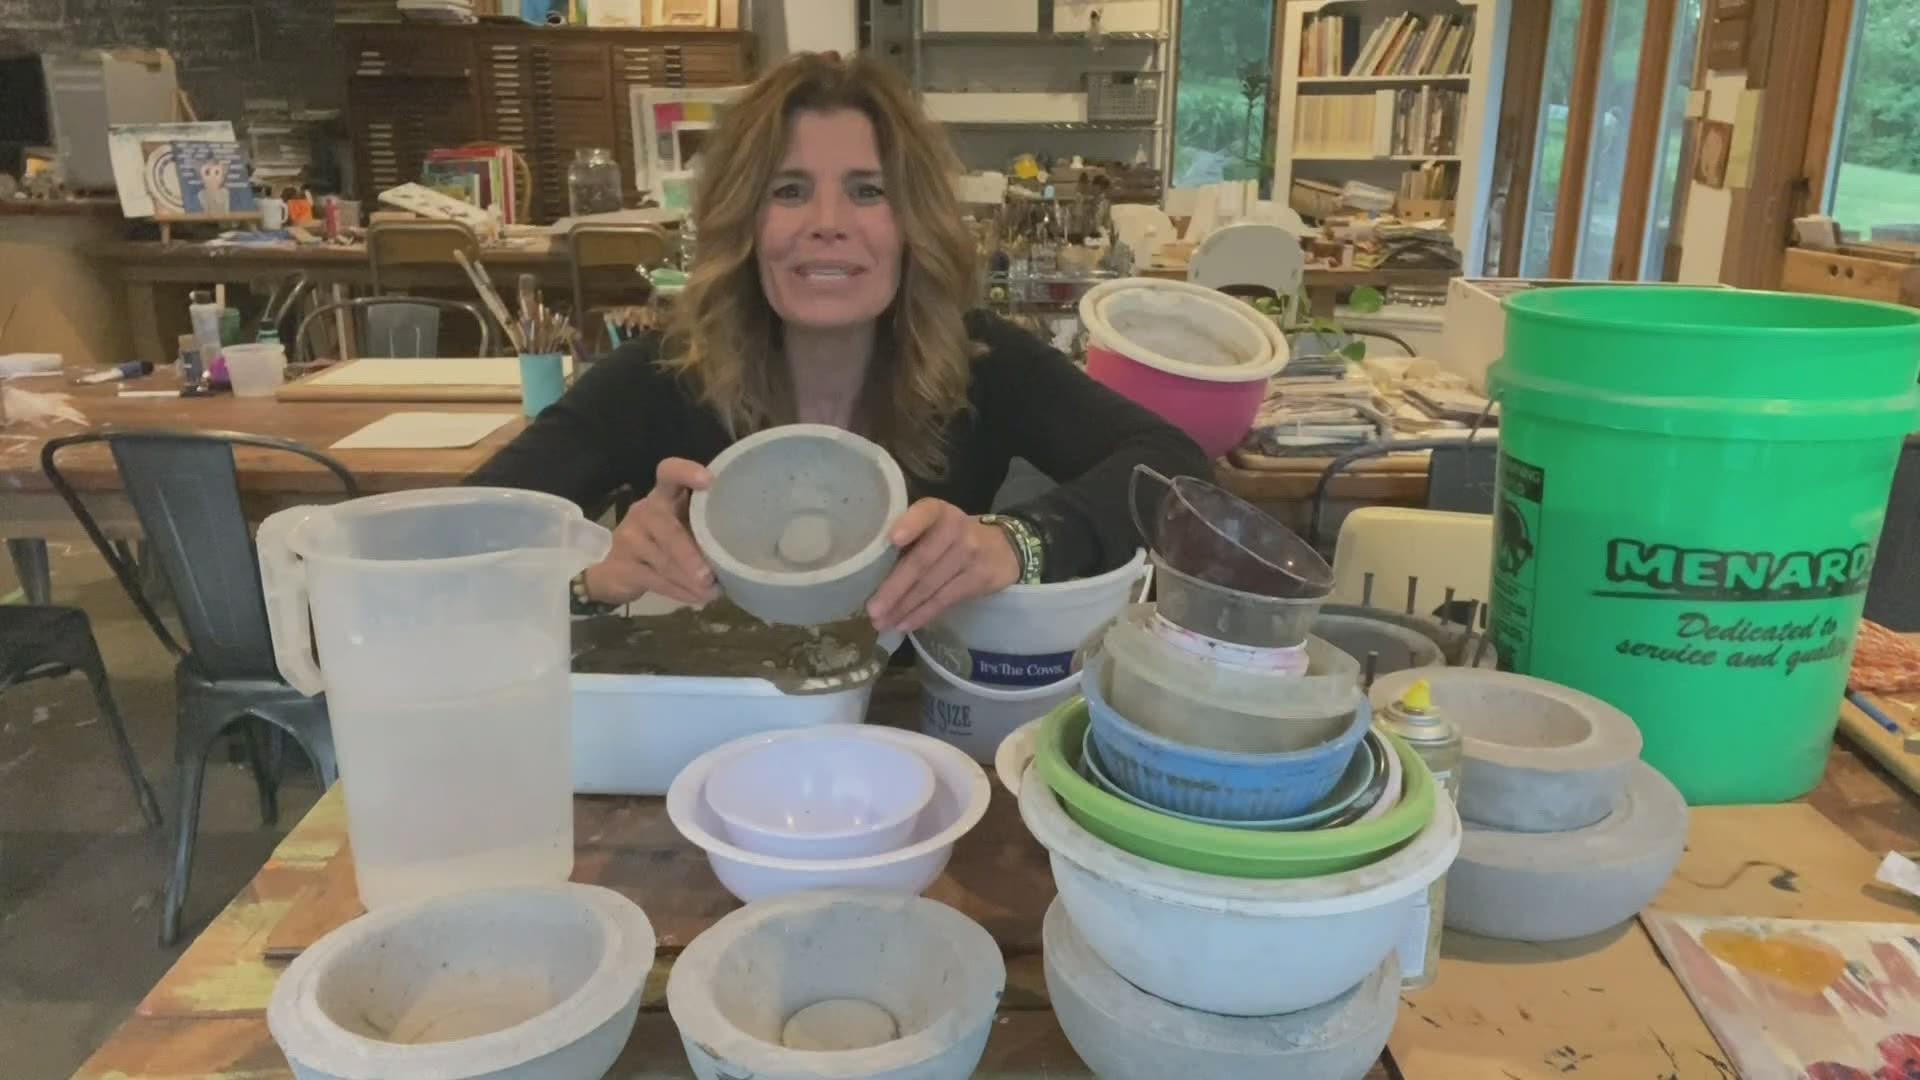 Michele creates bowls out of concrete this morning on Iowa Live